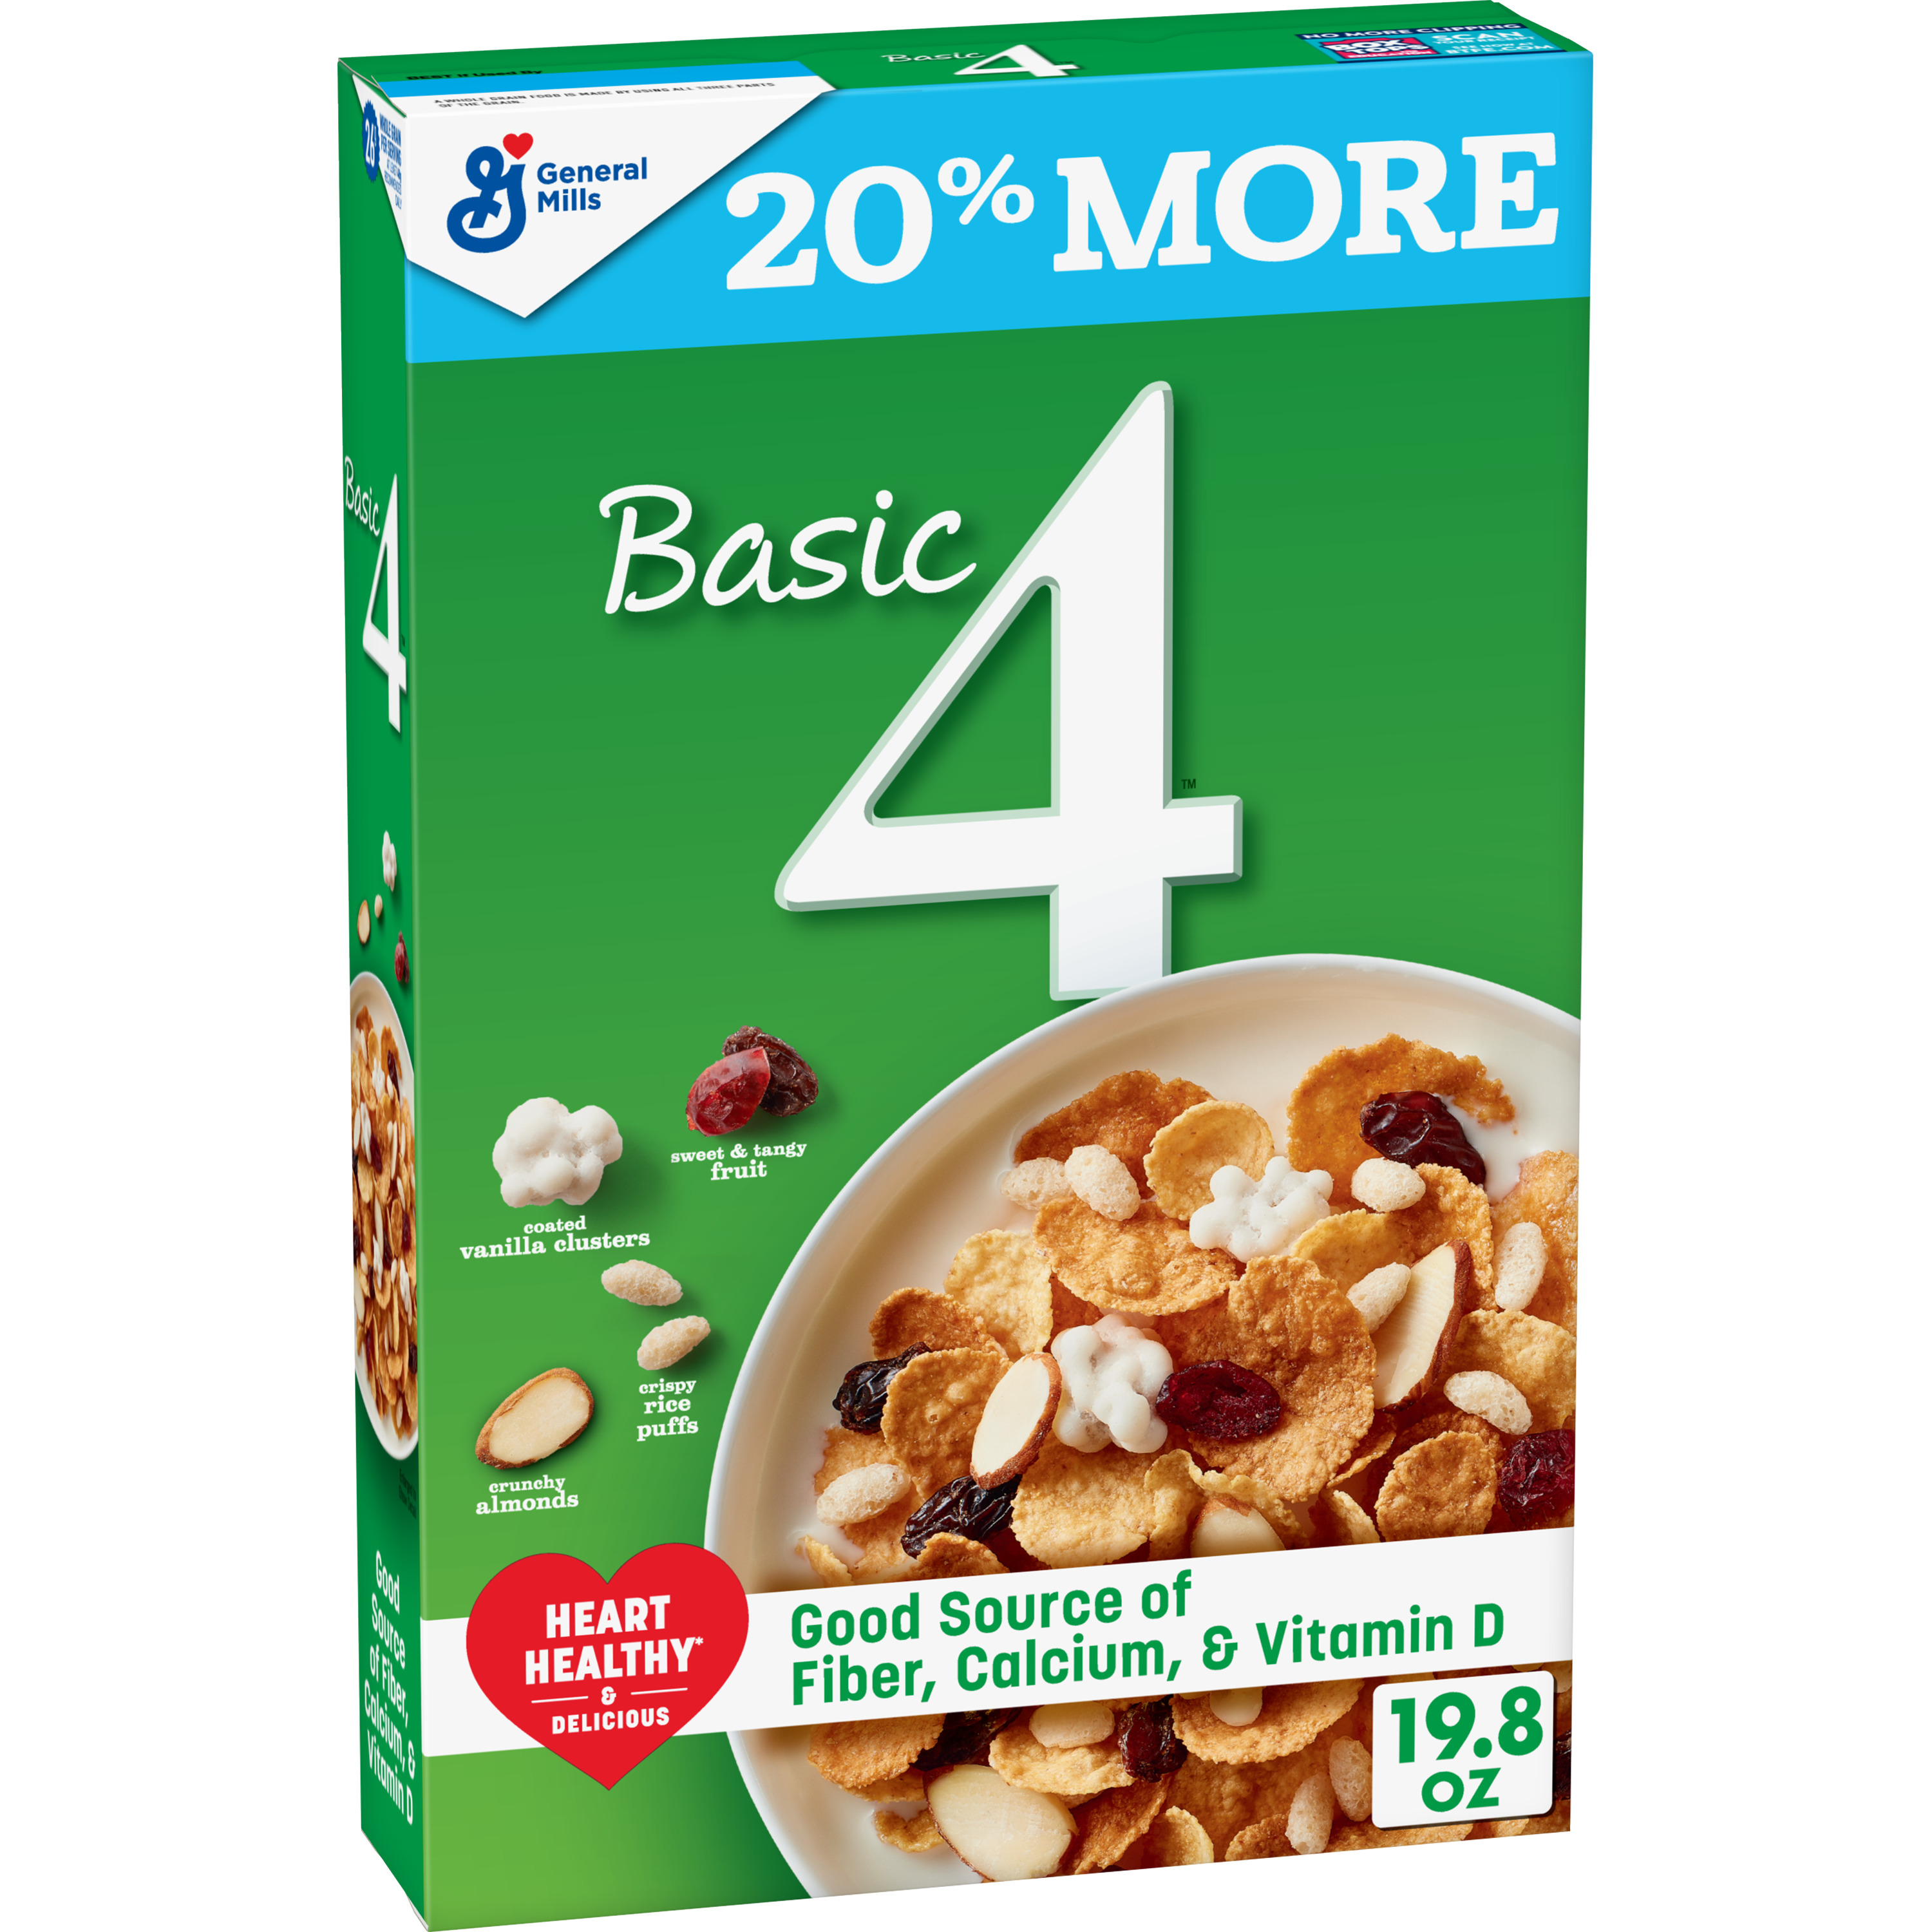 Basic 4, Multigrain Fruit and Nuts Cereal, 19.8 oz pack of 2 - image 1 of 9